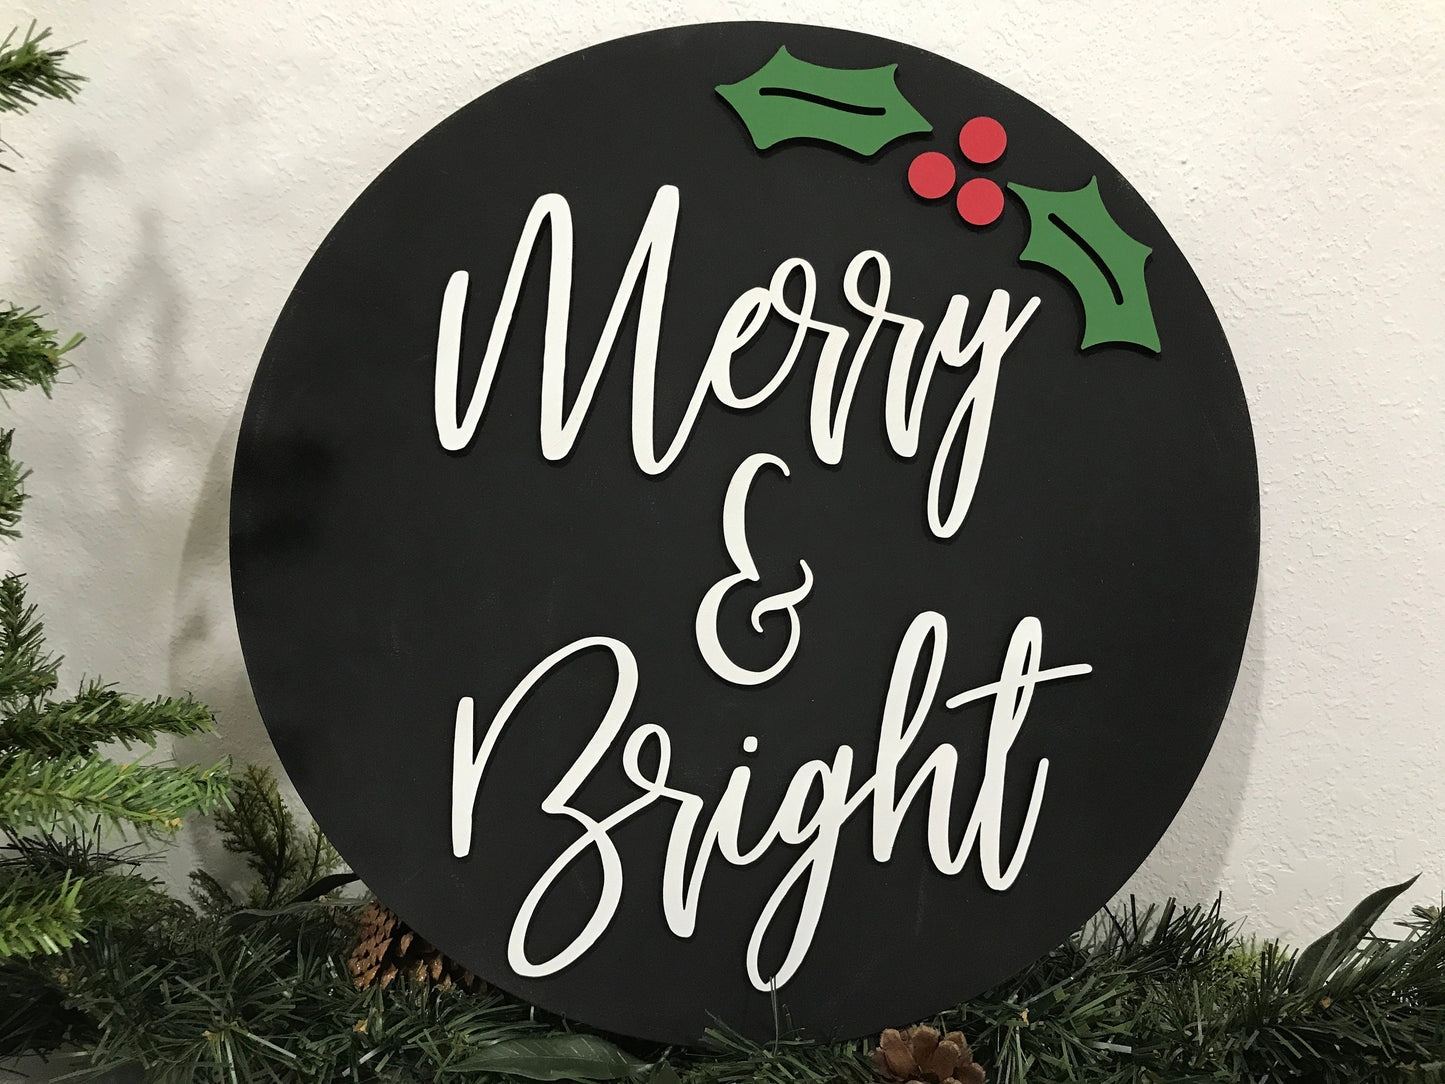 Merry & bright sign, Christmas decorations, 3D holiday decor, wood signs, living room wooden sign wall hanging, holly leaves mantel decor